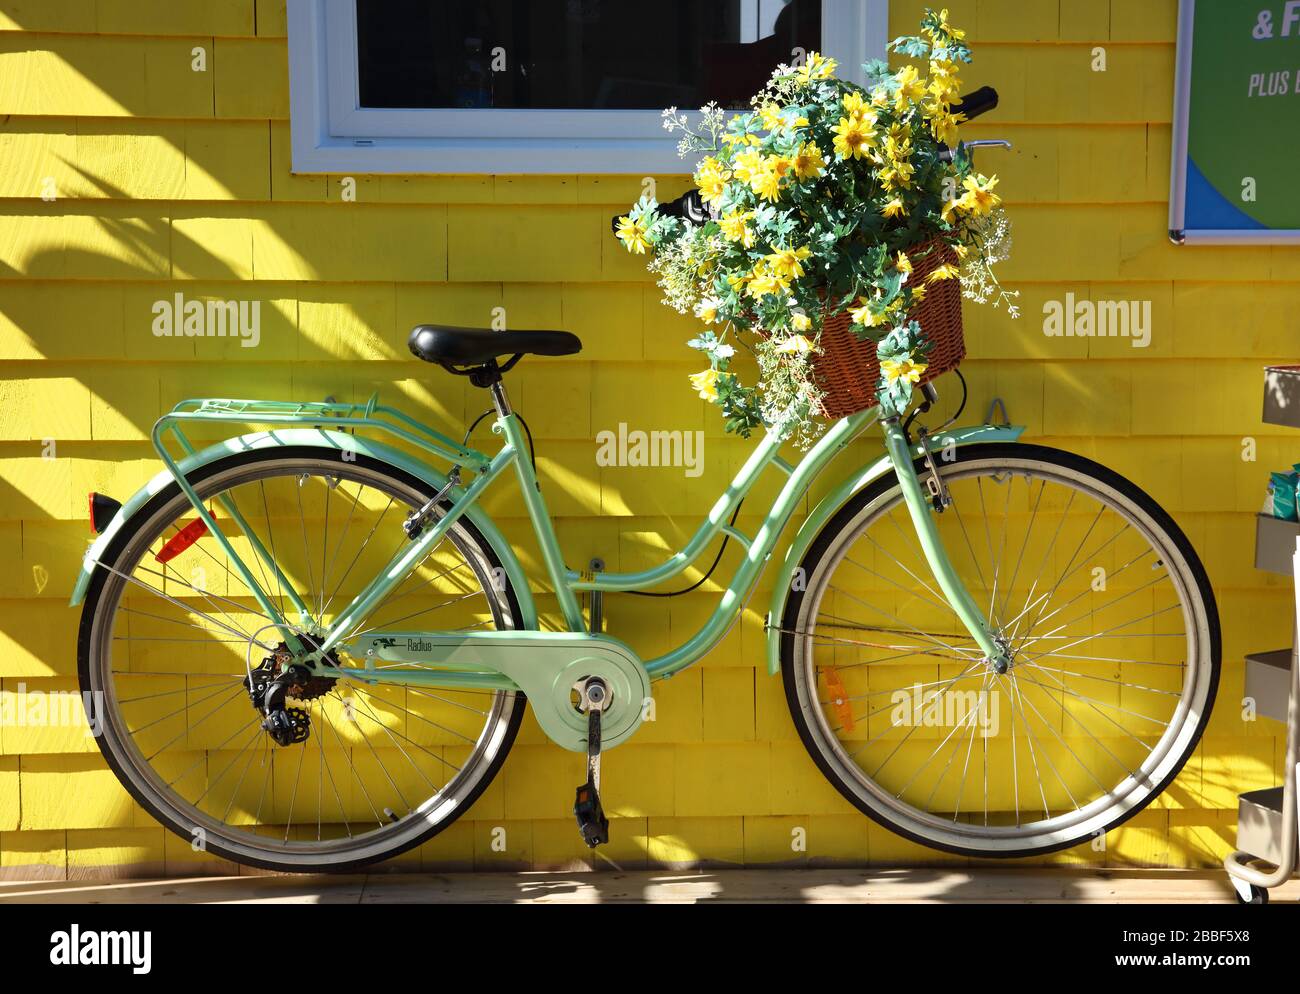 Pale green bicycle with basket of flowers on its handlebars in front of the yellow cladding of a bike rental shop 'I Bike Sydney', Sydney, Cape Breton, Nova Scotia, Canada Stock Photo